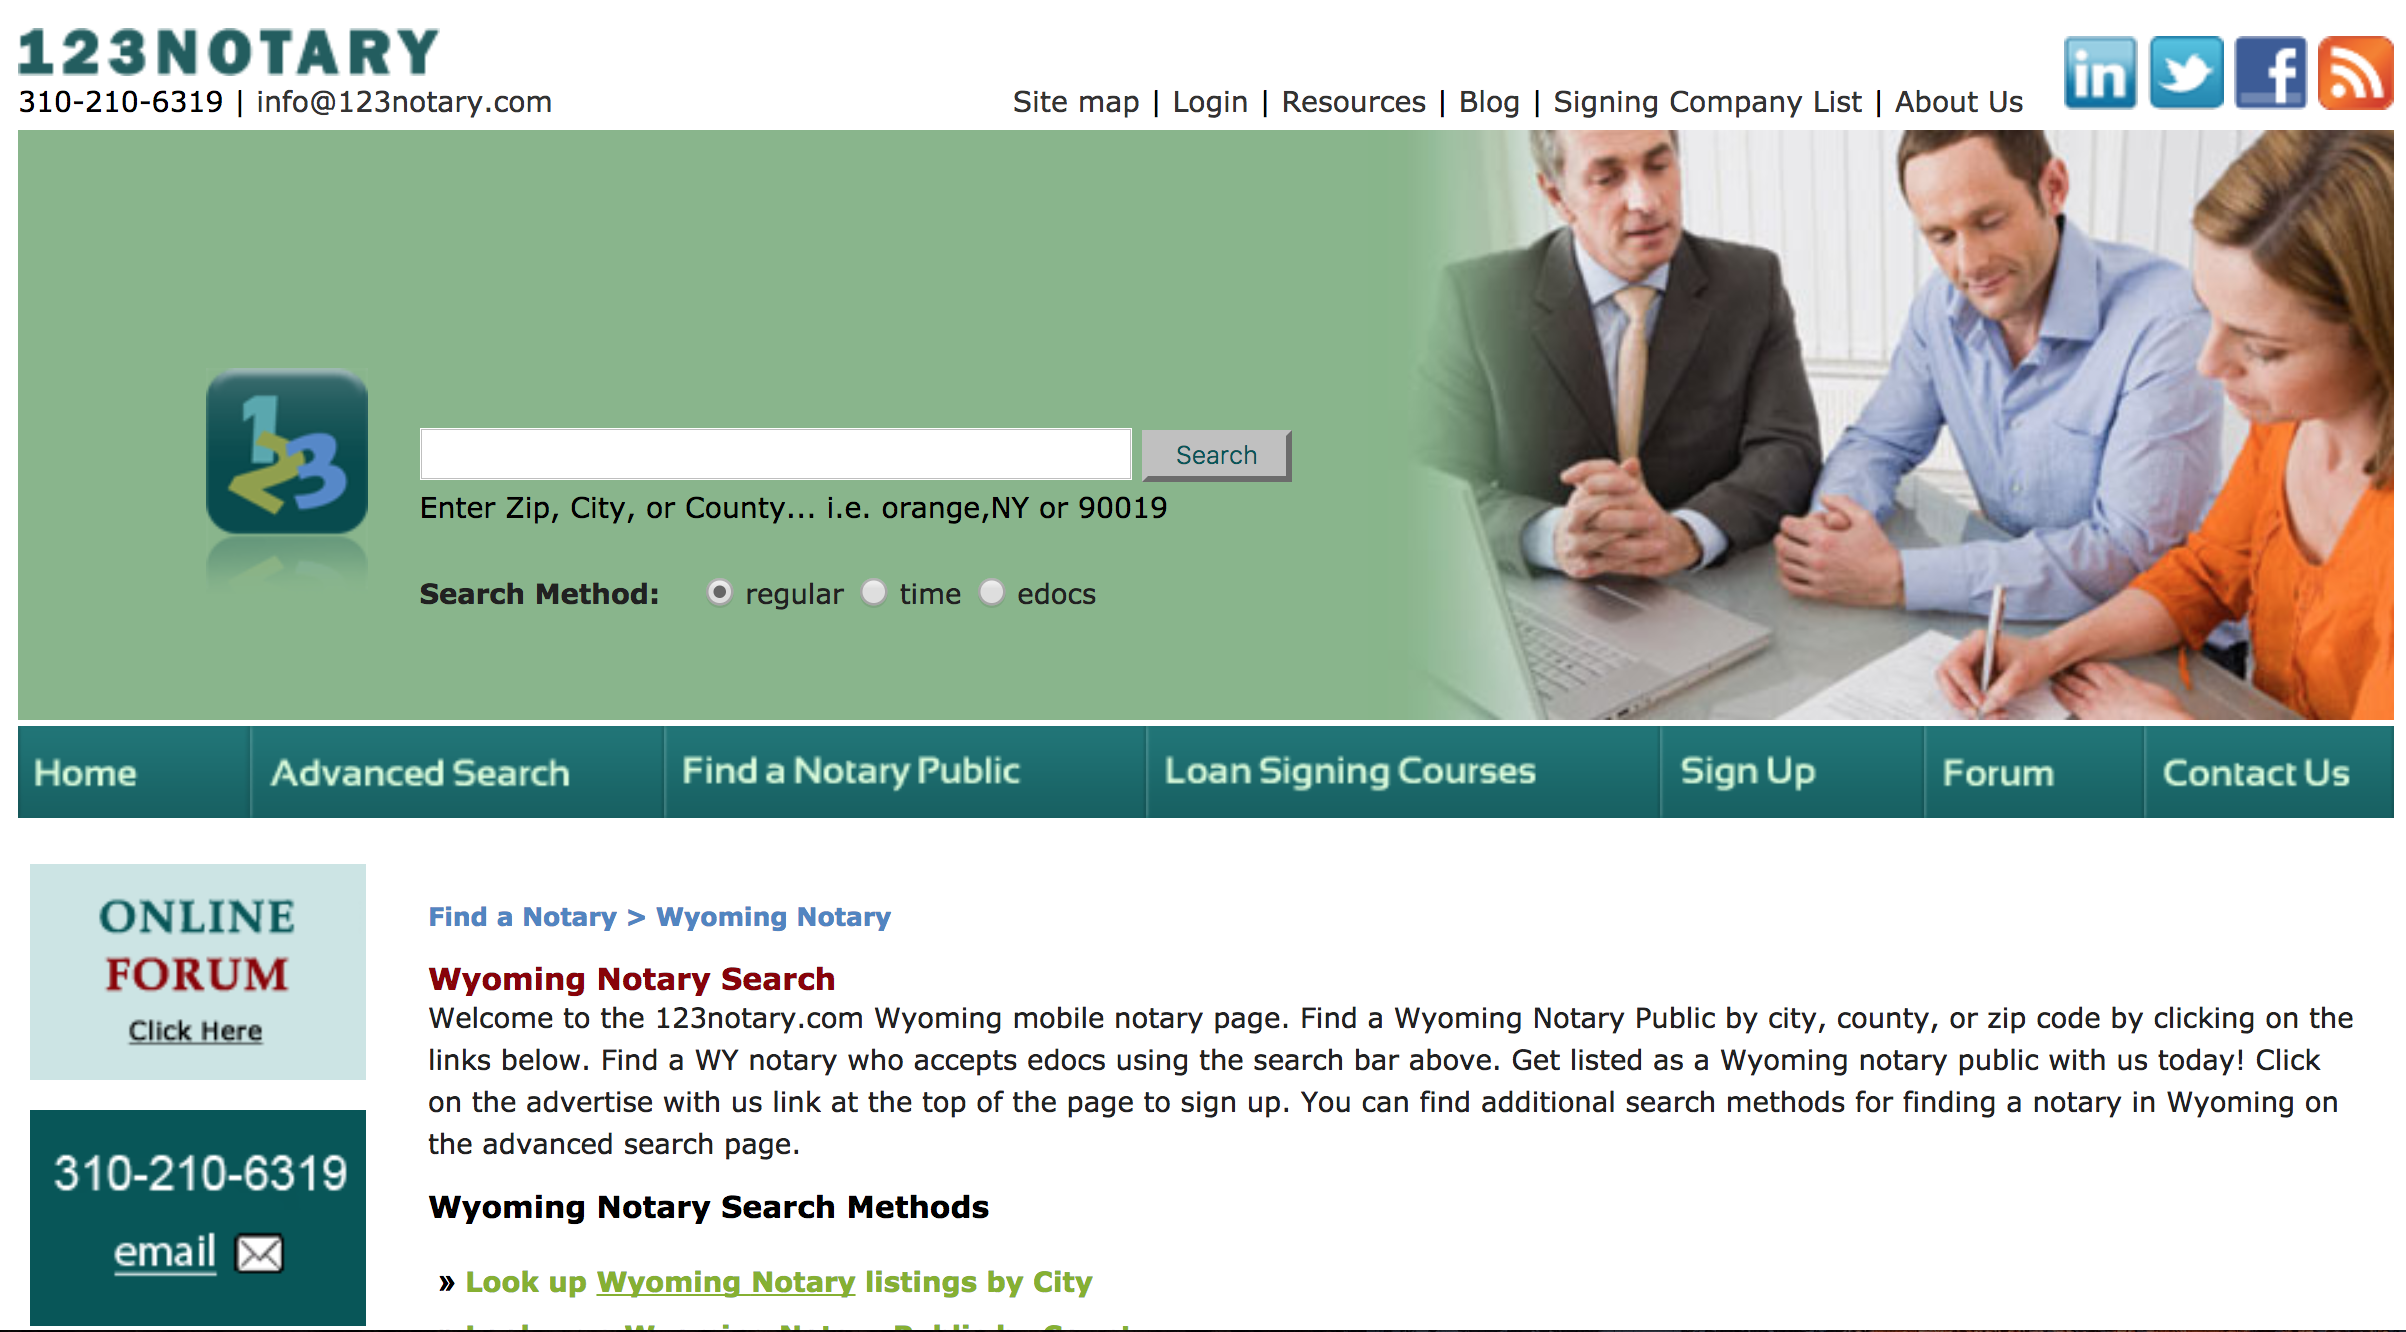 wyoming notary search on 123notary website